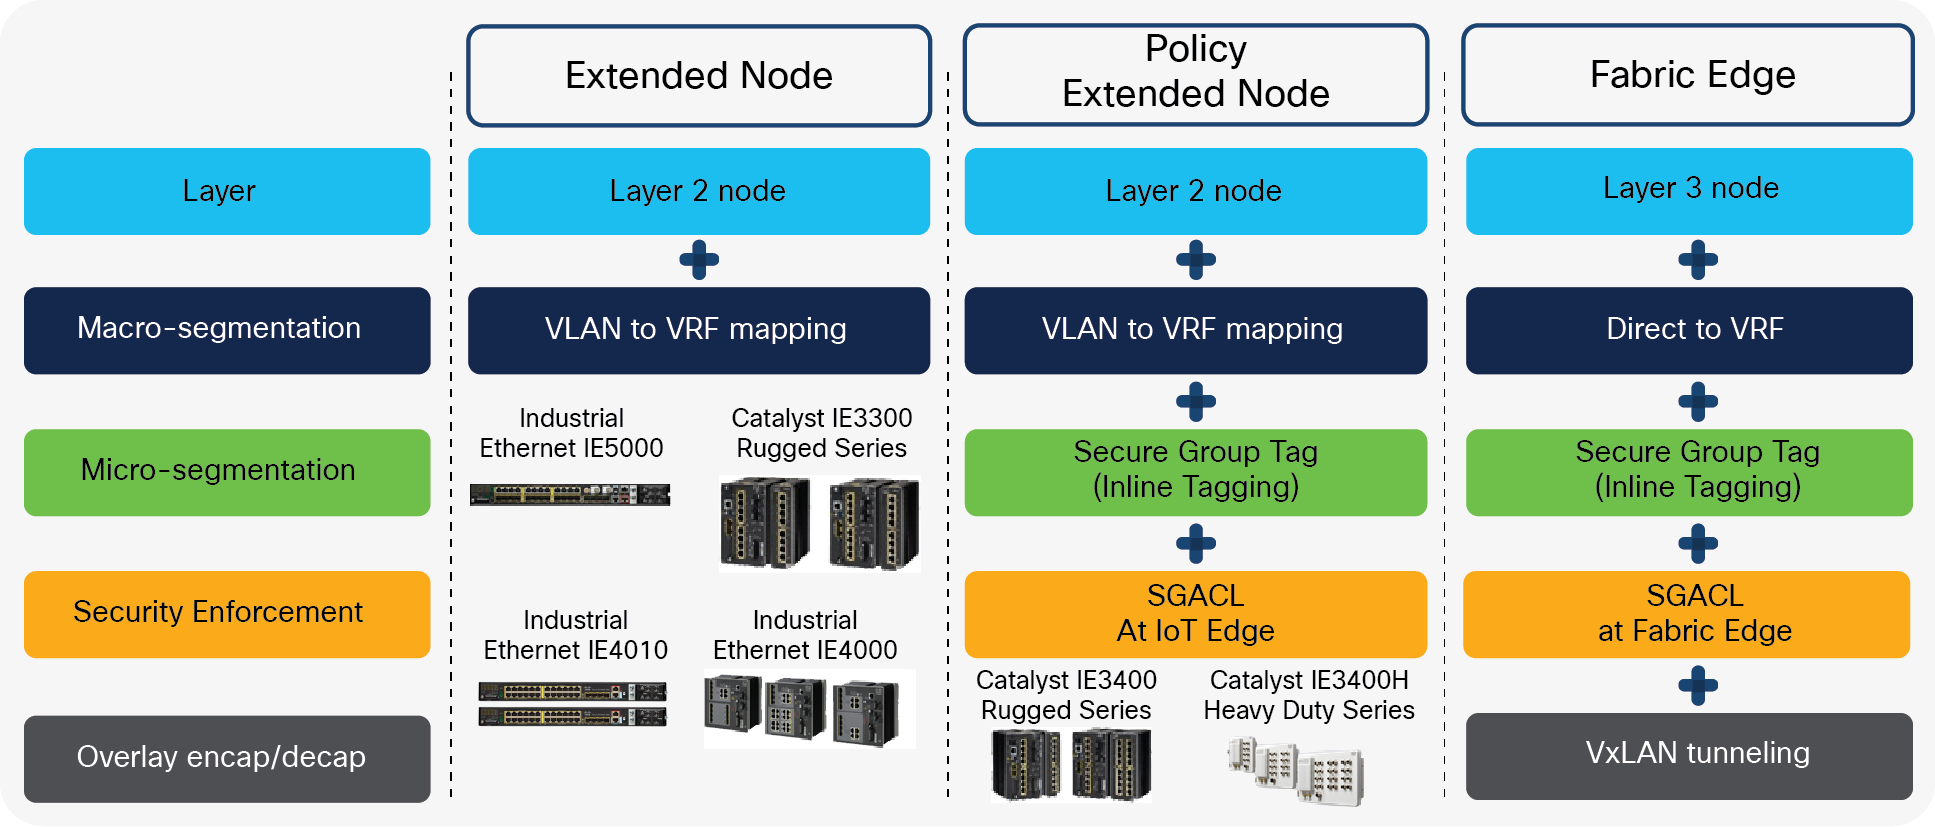 Extended Node, Policy Extended Node and Fabric Edge